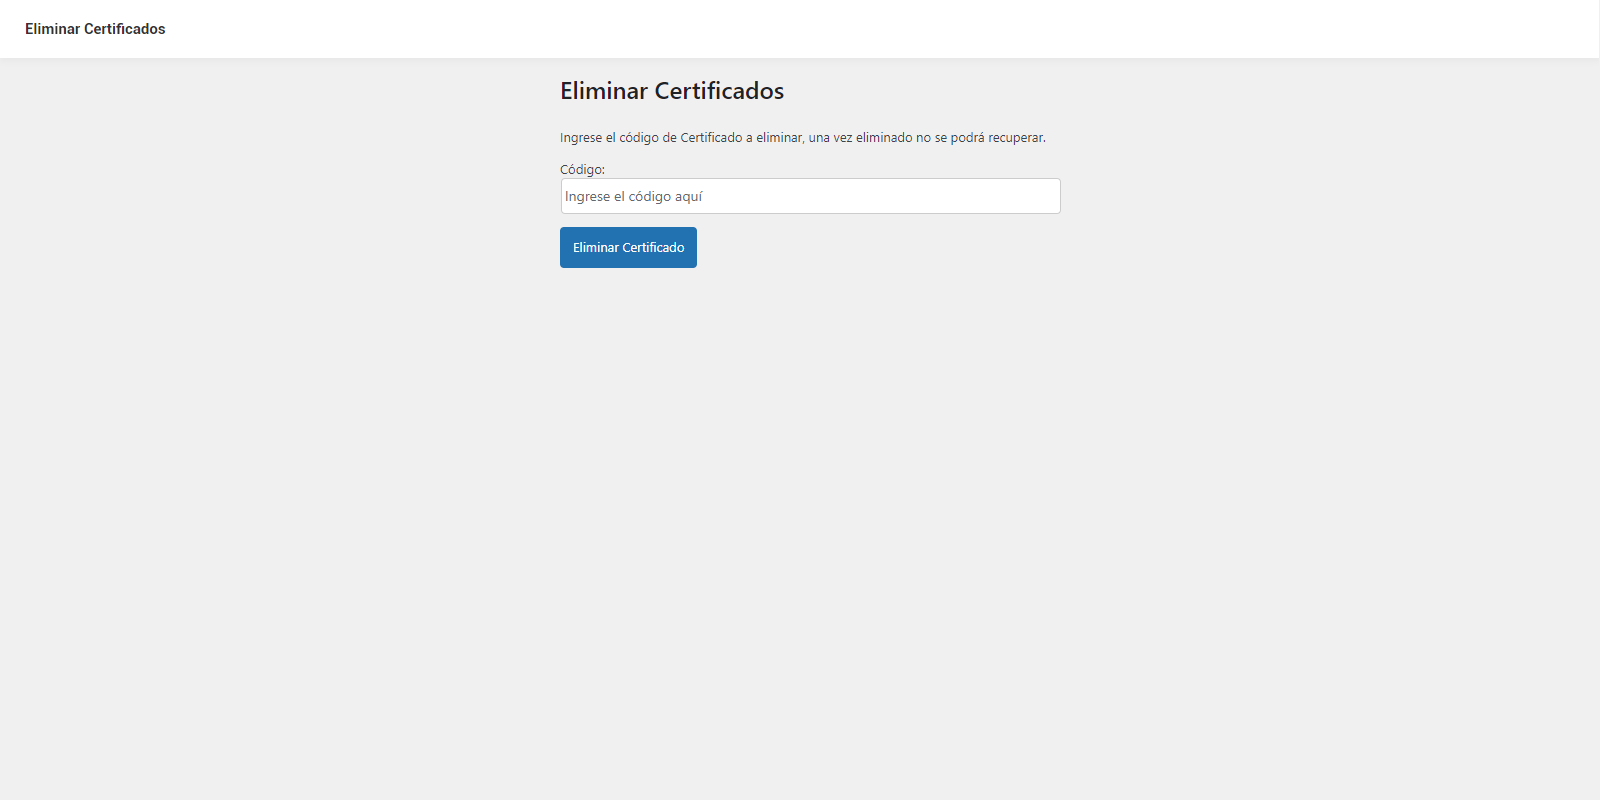 Delete Certificates with the respective code.